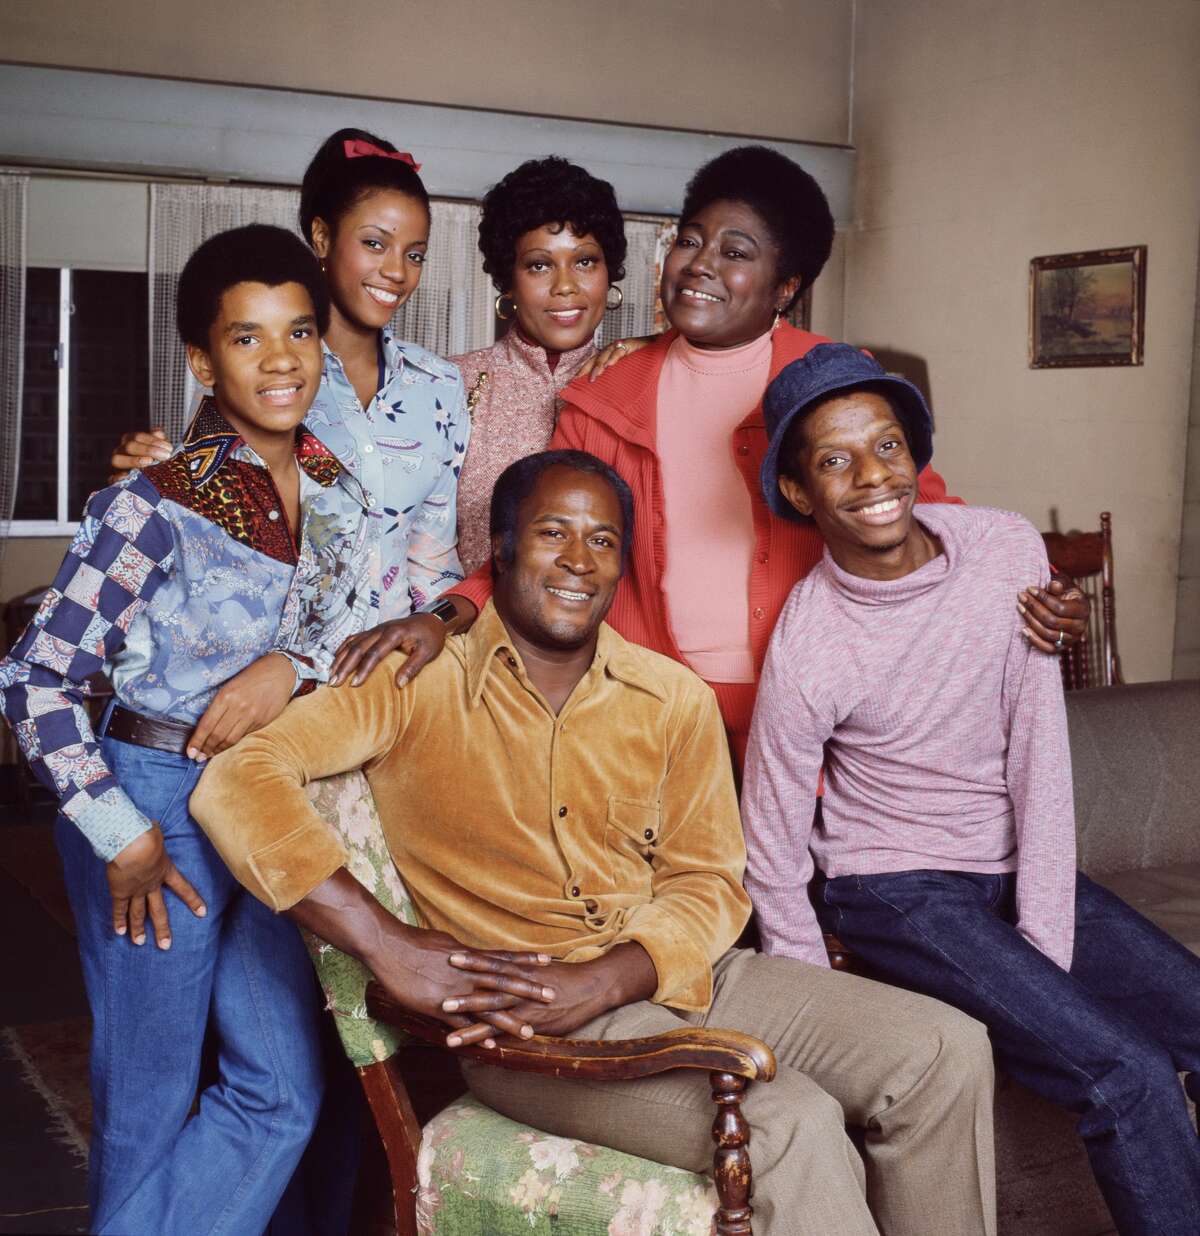 (Front row) John Amos and Jimmie Walker; (back row) Ralph Carter, BernNadette Stanis, Ja'net DuBois and Esther Rolle, "Good Times" Years active: 1974-79 Highest Nielsen rating: No. 7